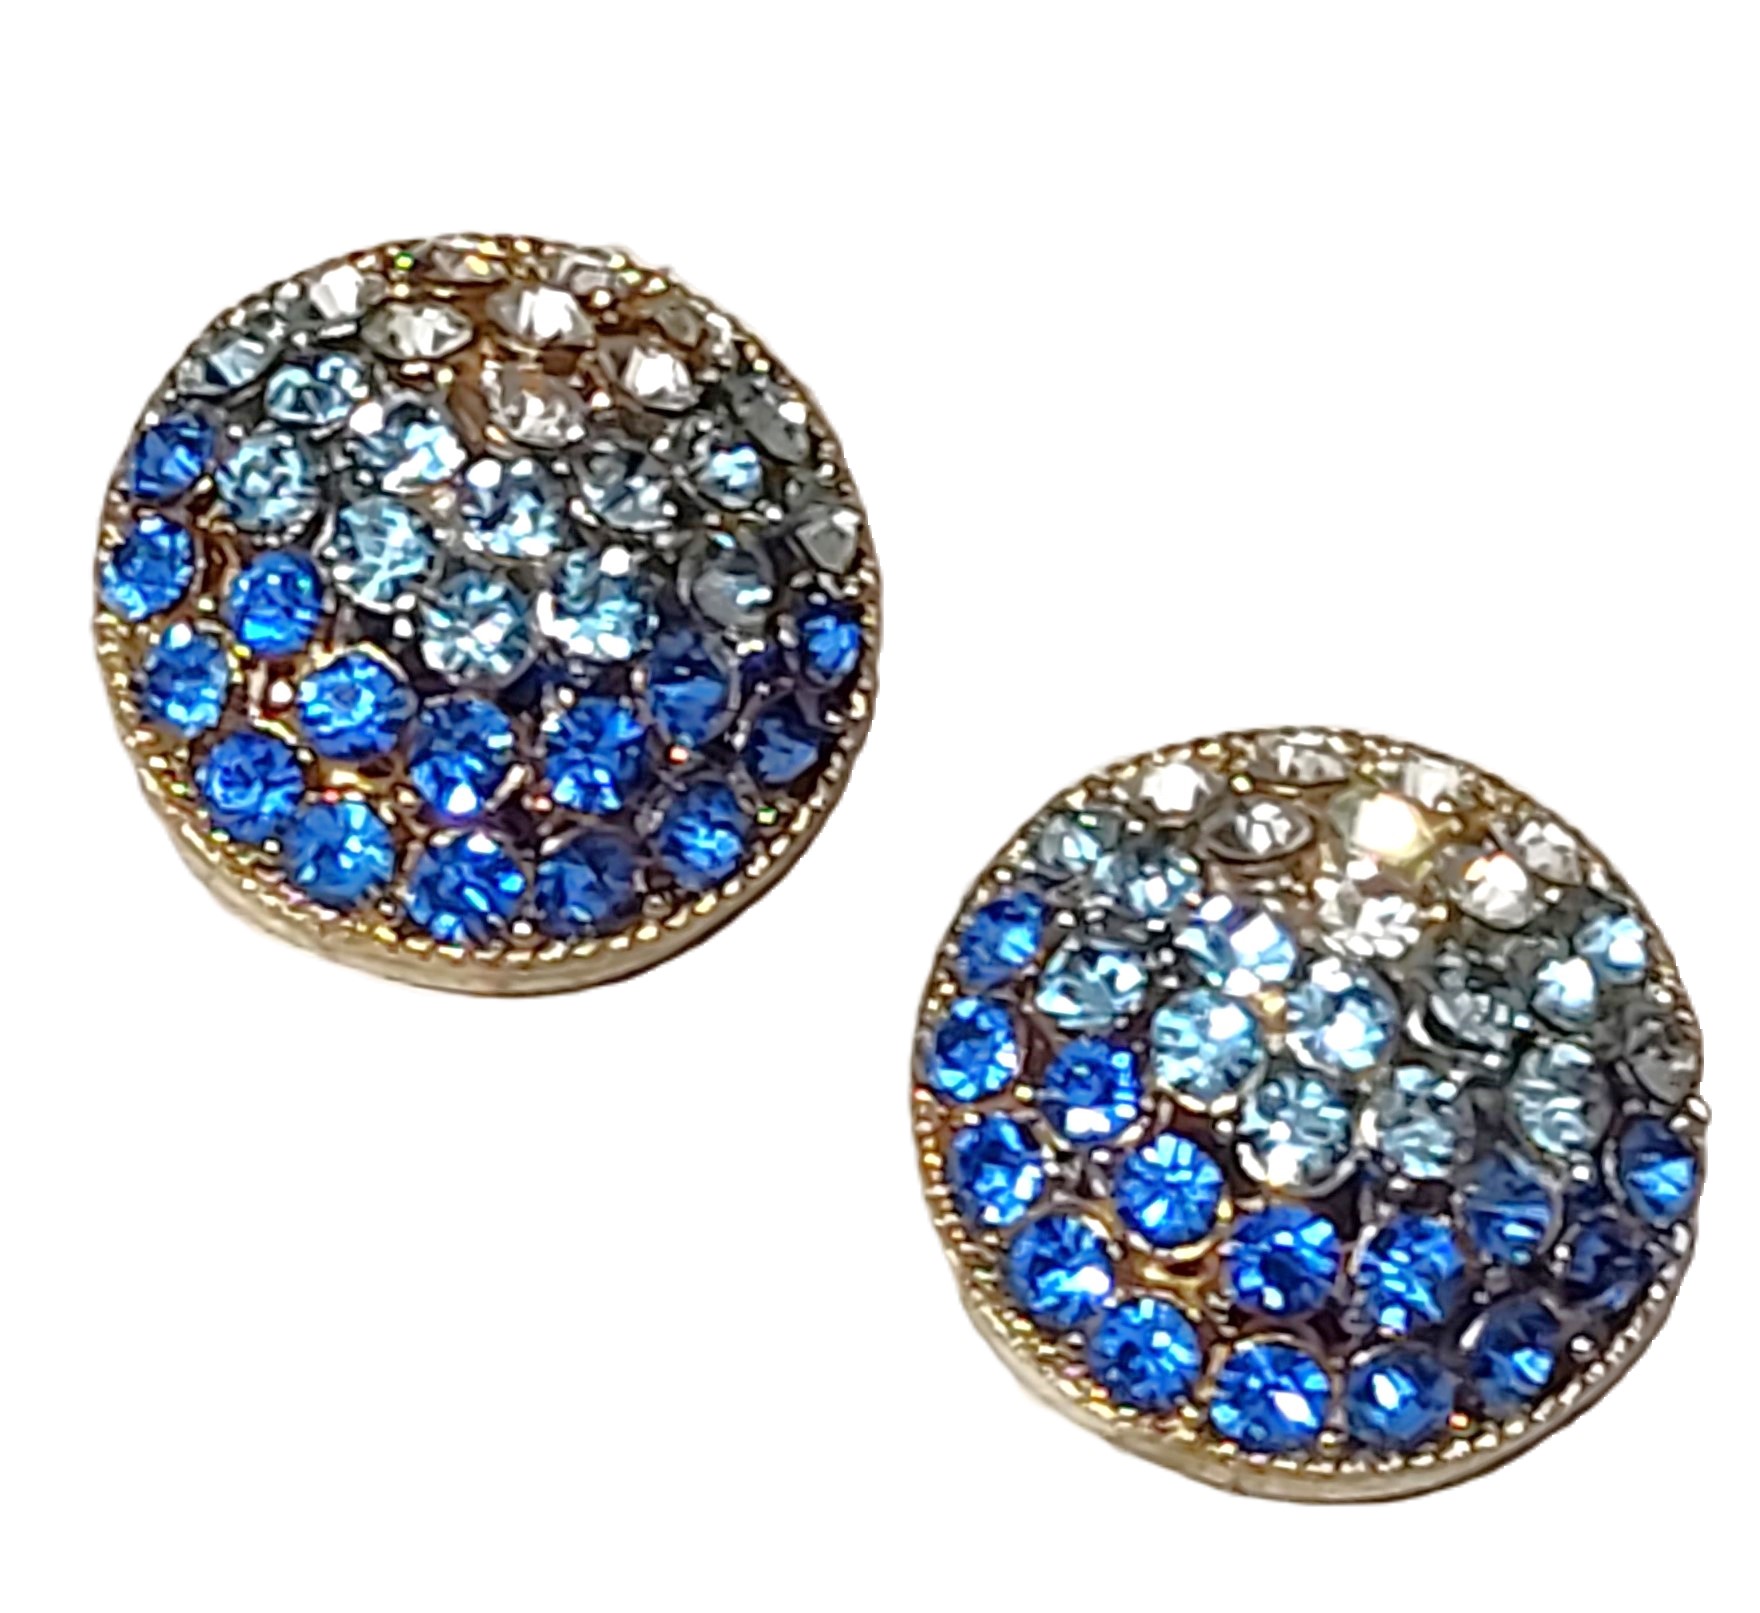 Blue ombre rhinestone earrings, vintage clip ons signed marked Pat2733491